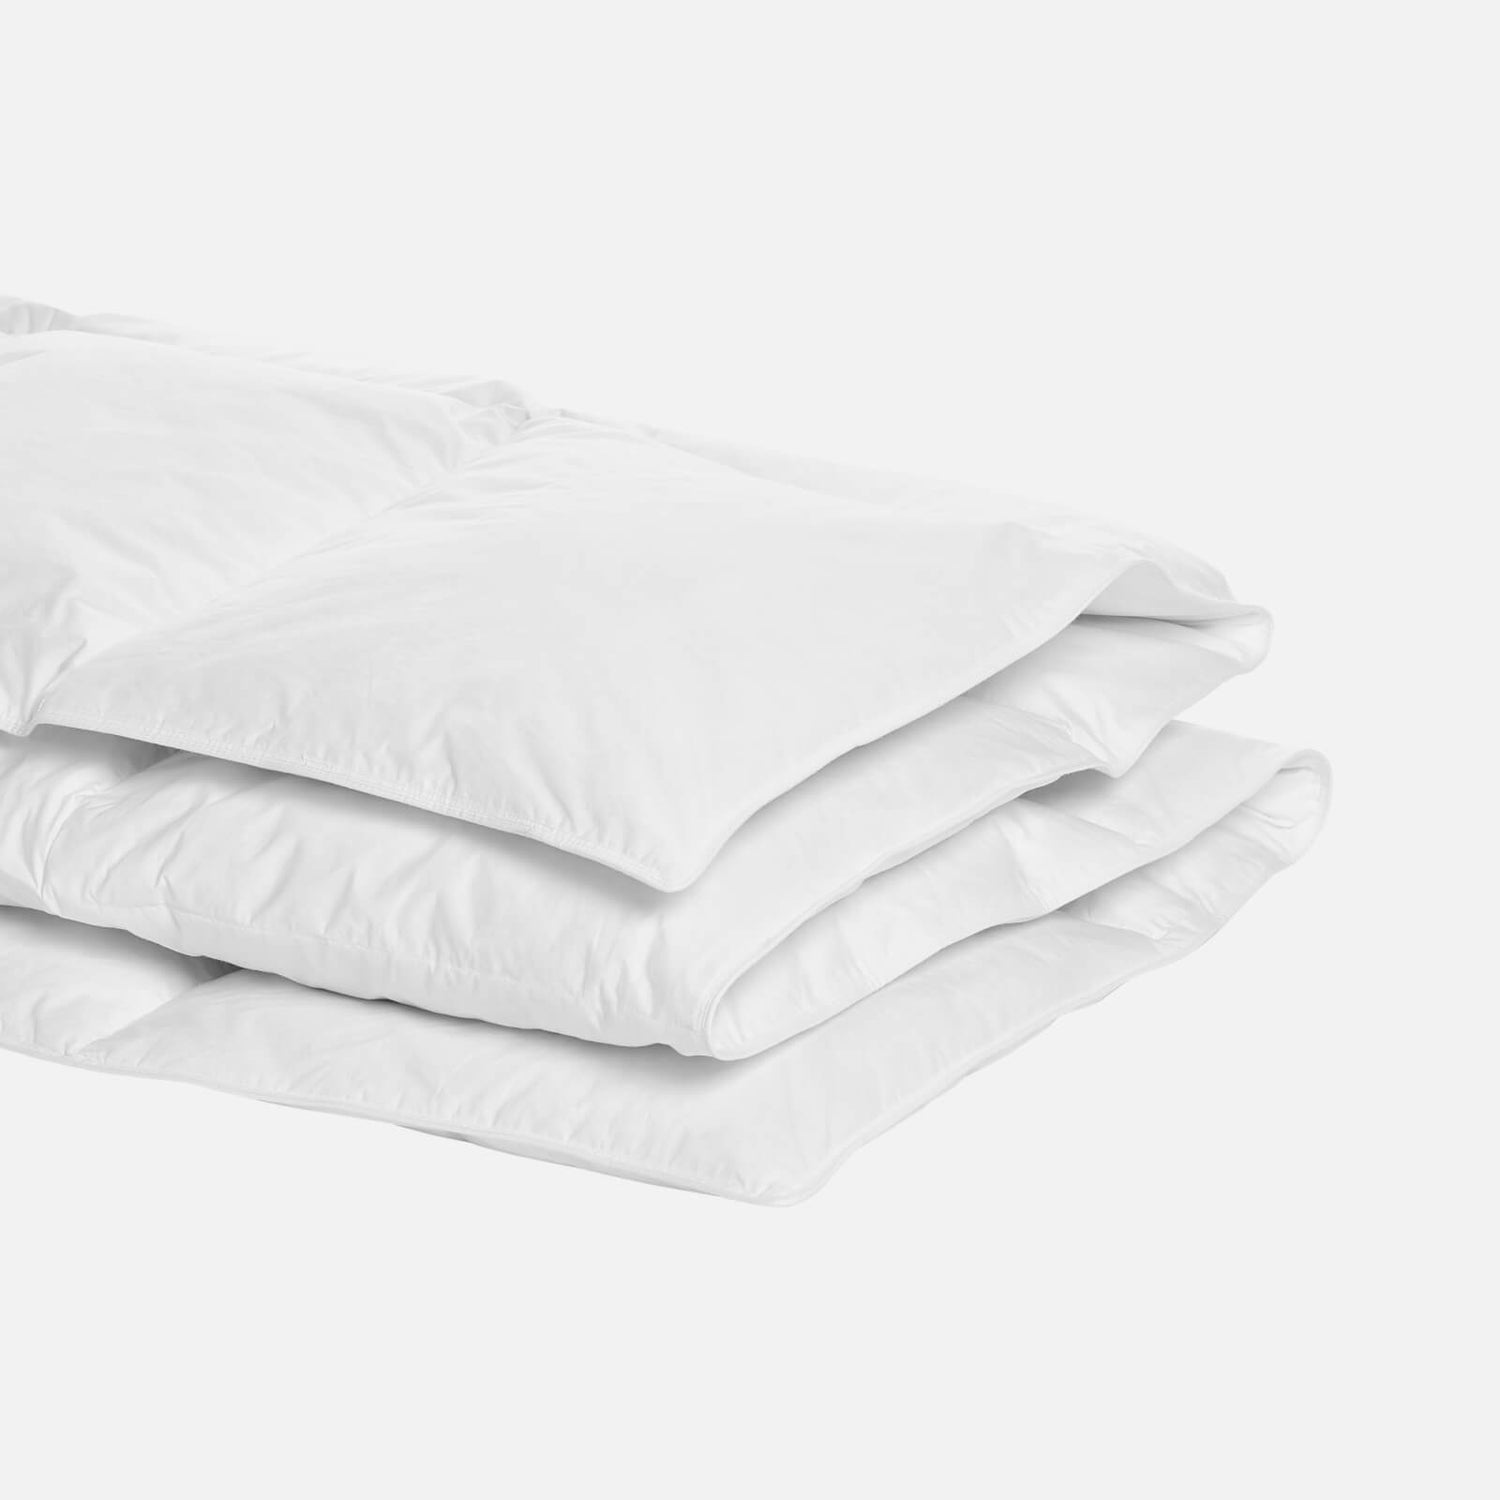 ïn home Duck Feather and Down Duvet - White (13.5 Tog) - Super King